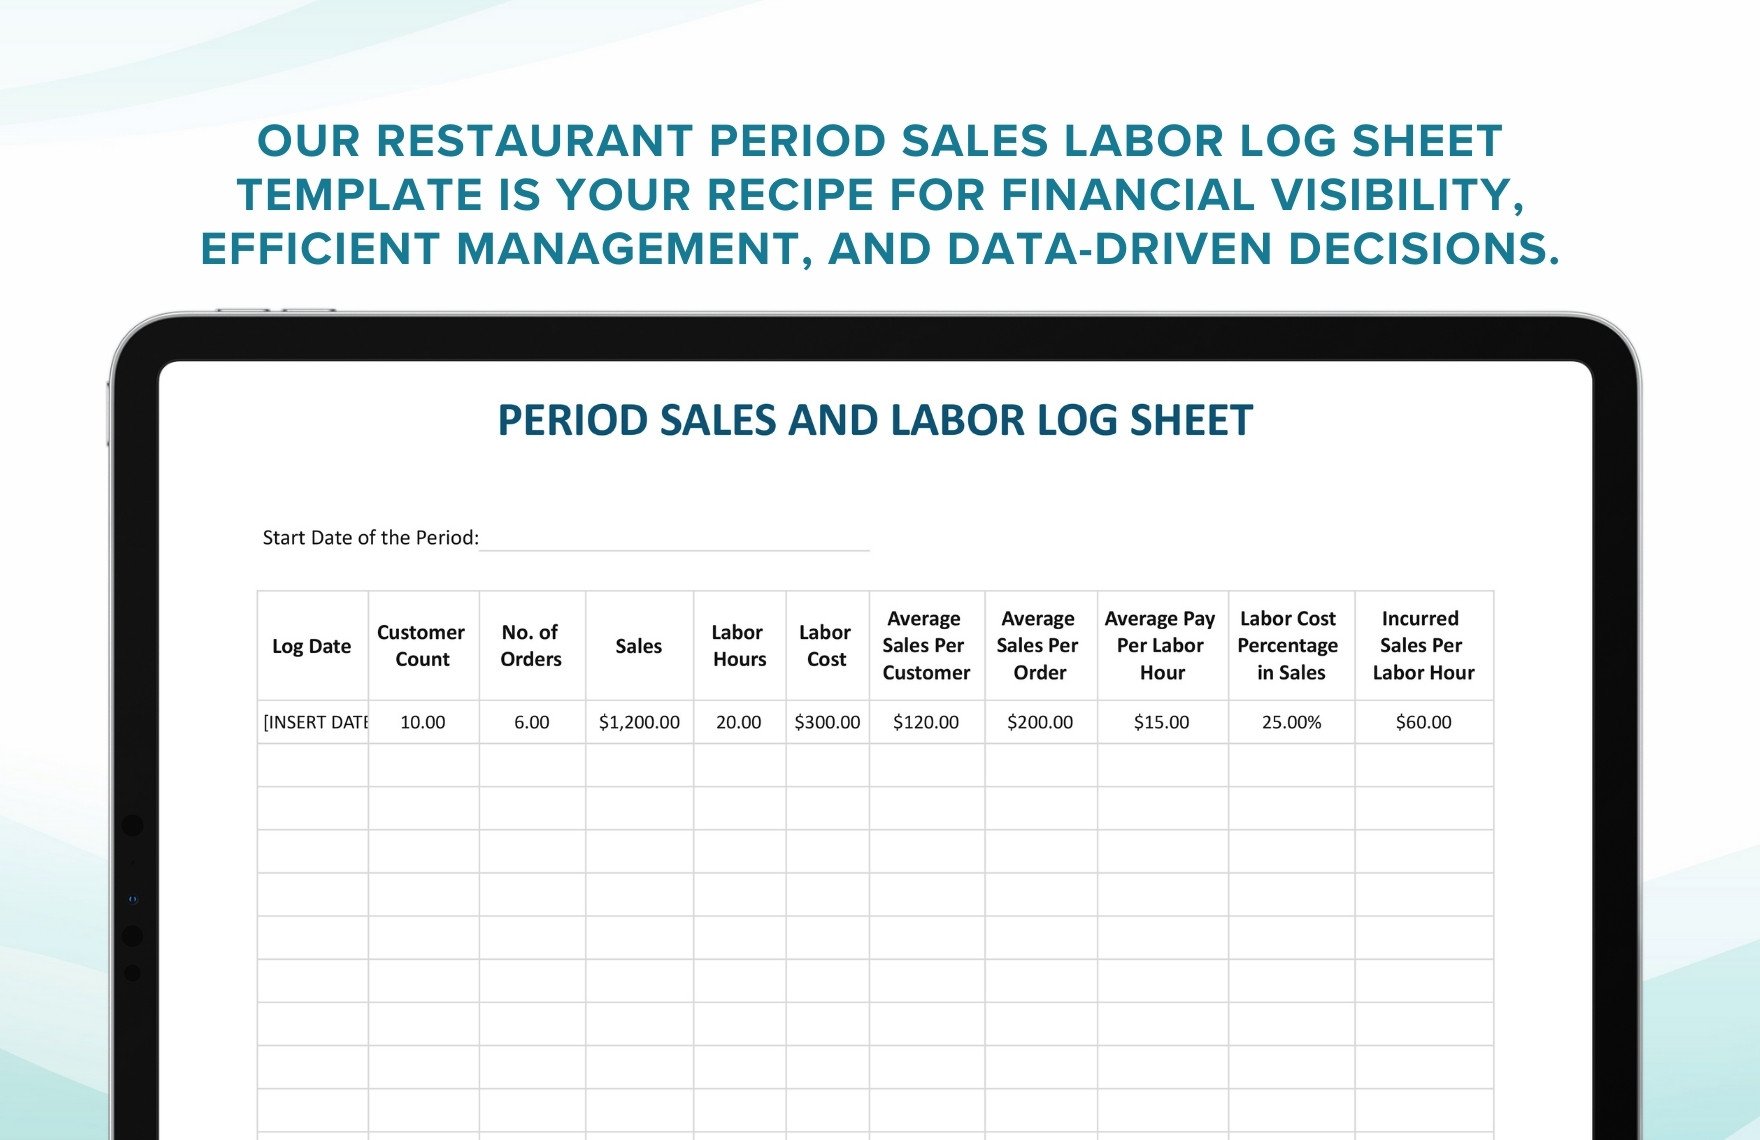 Restaurant Period Sales and Labor Log Sheet Template